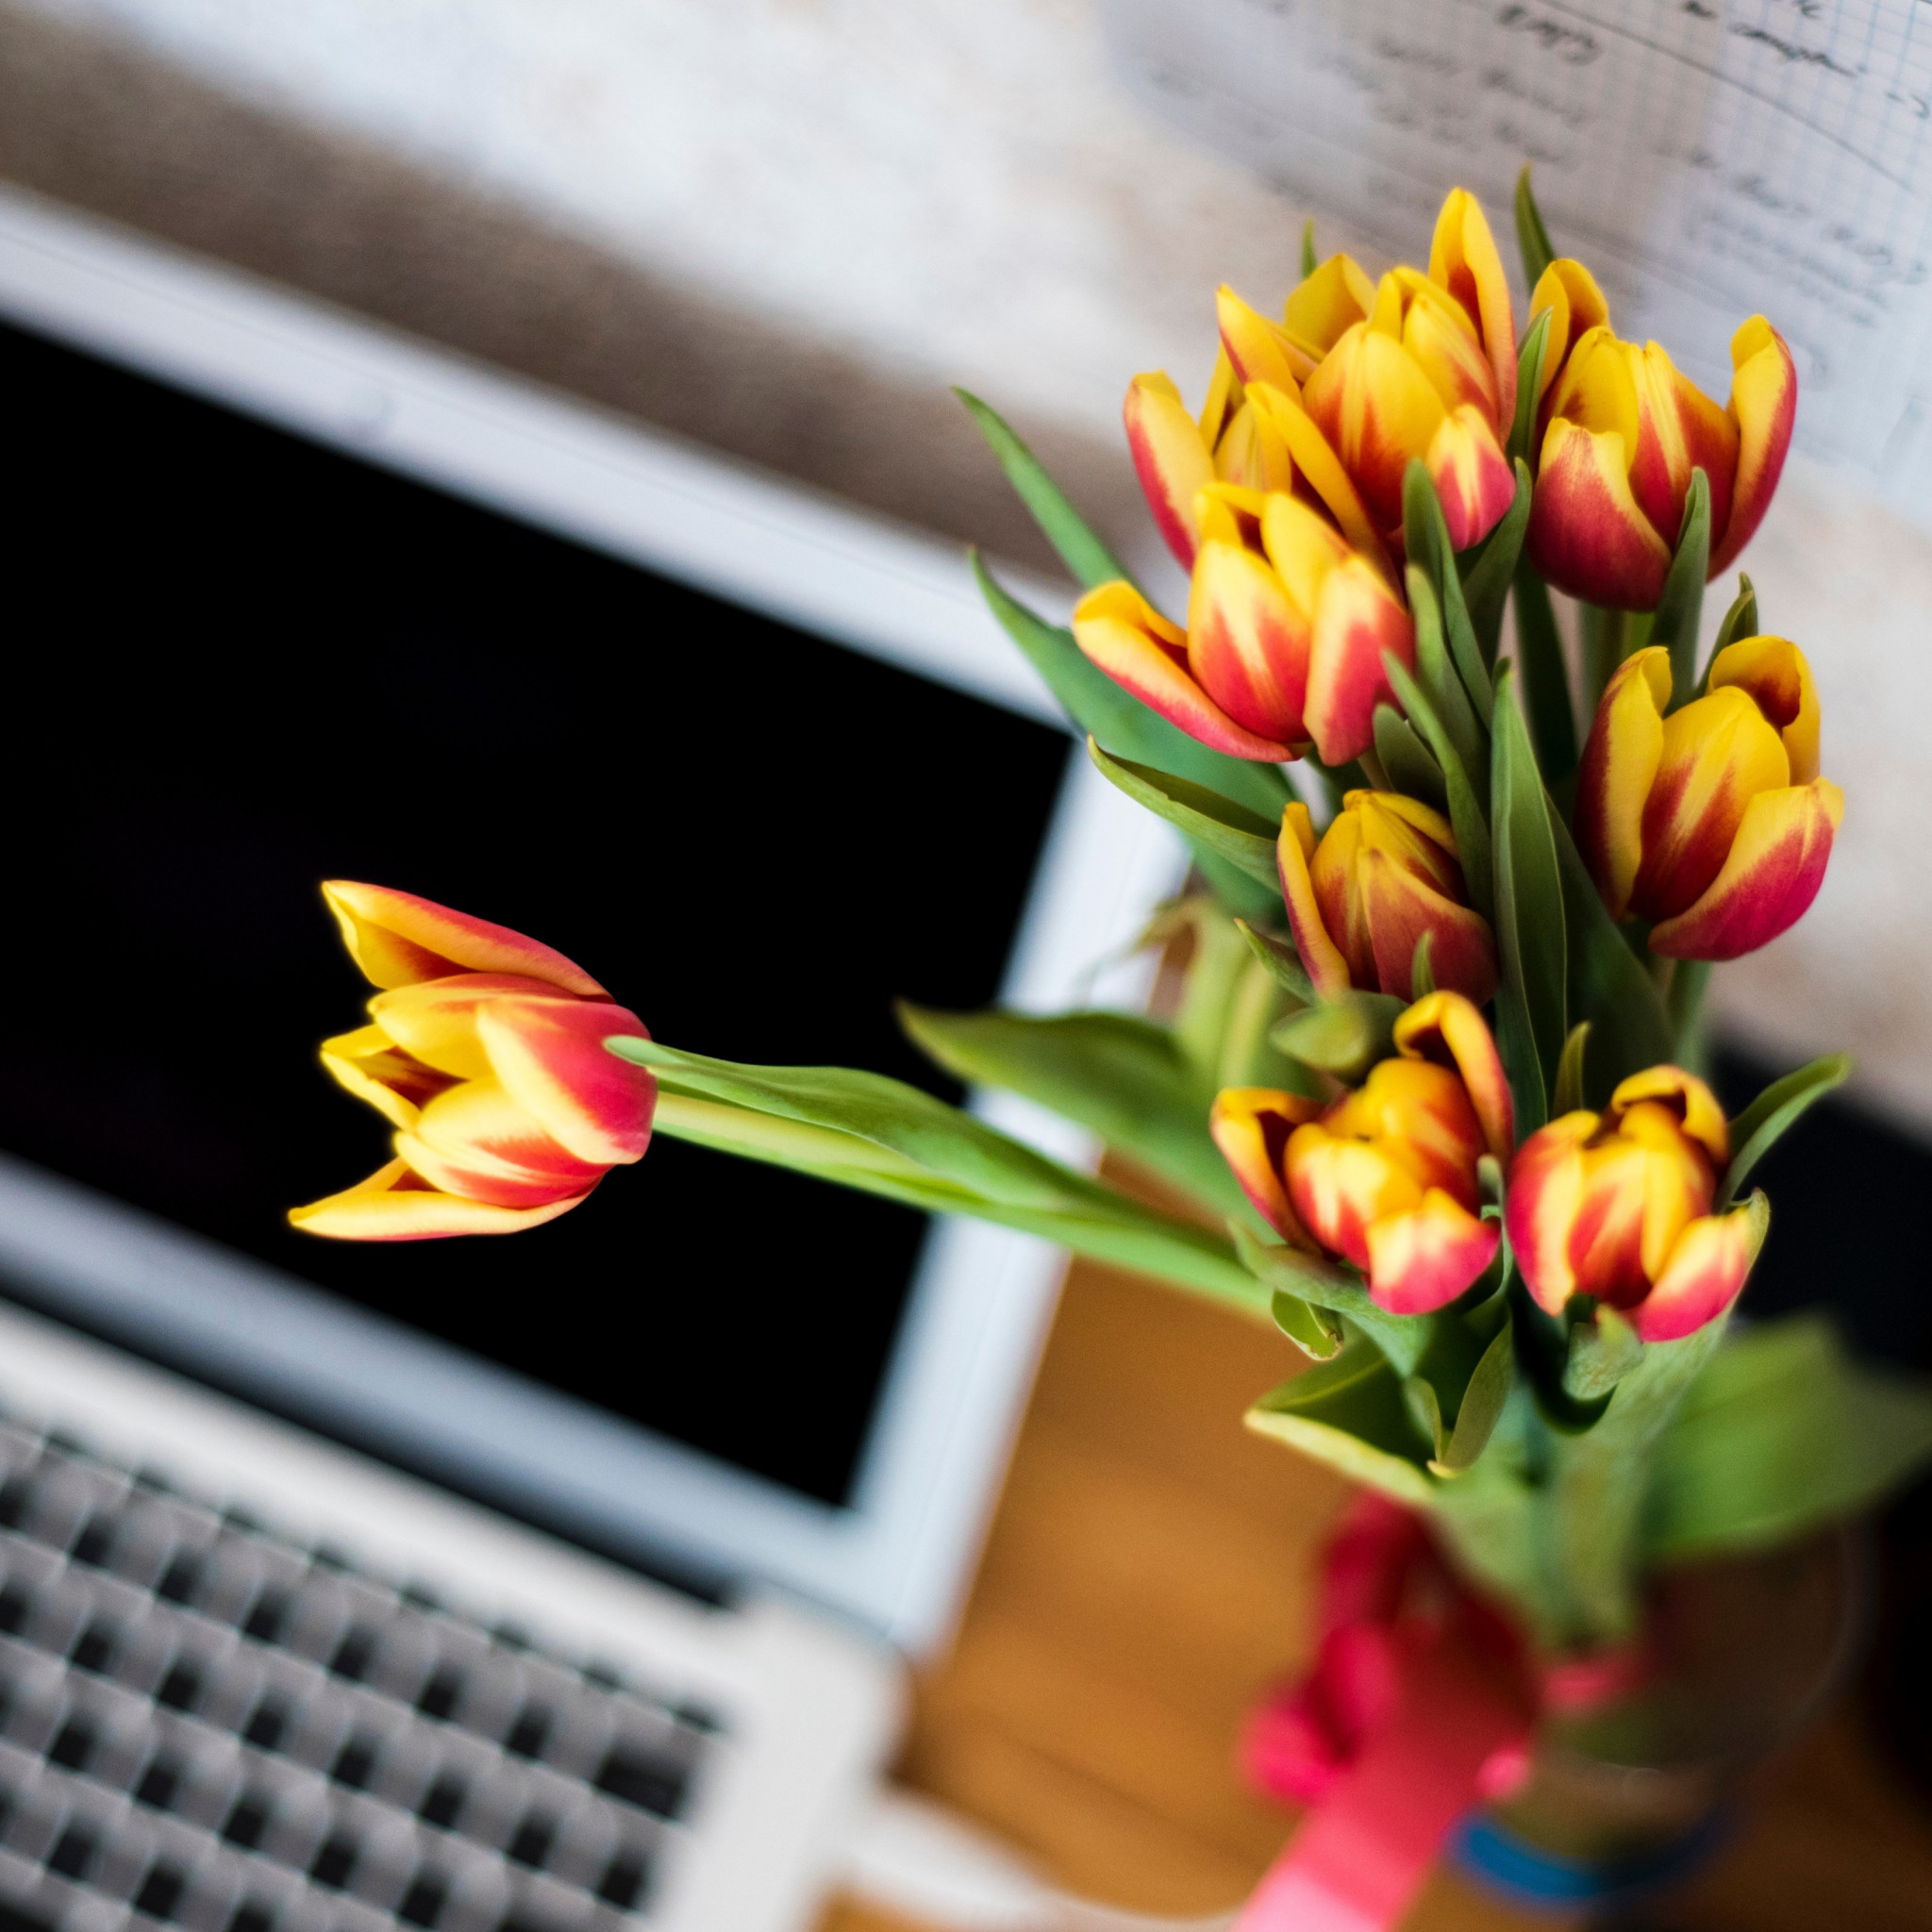 Laptop and tulips bouquet wallpaper 2048x2048